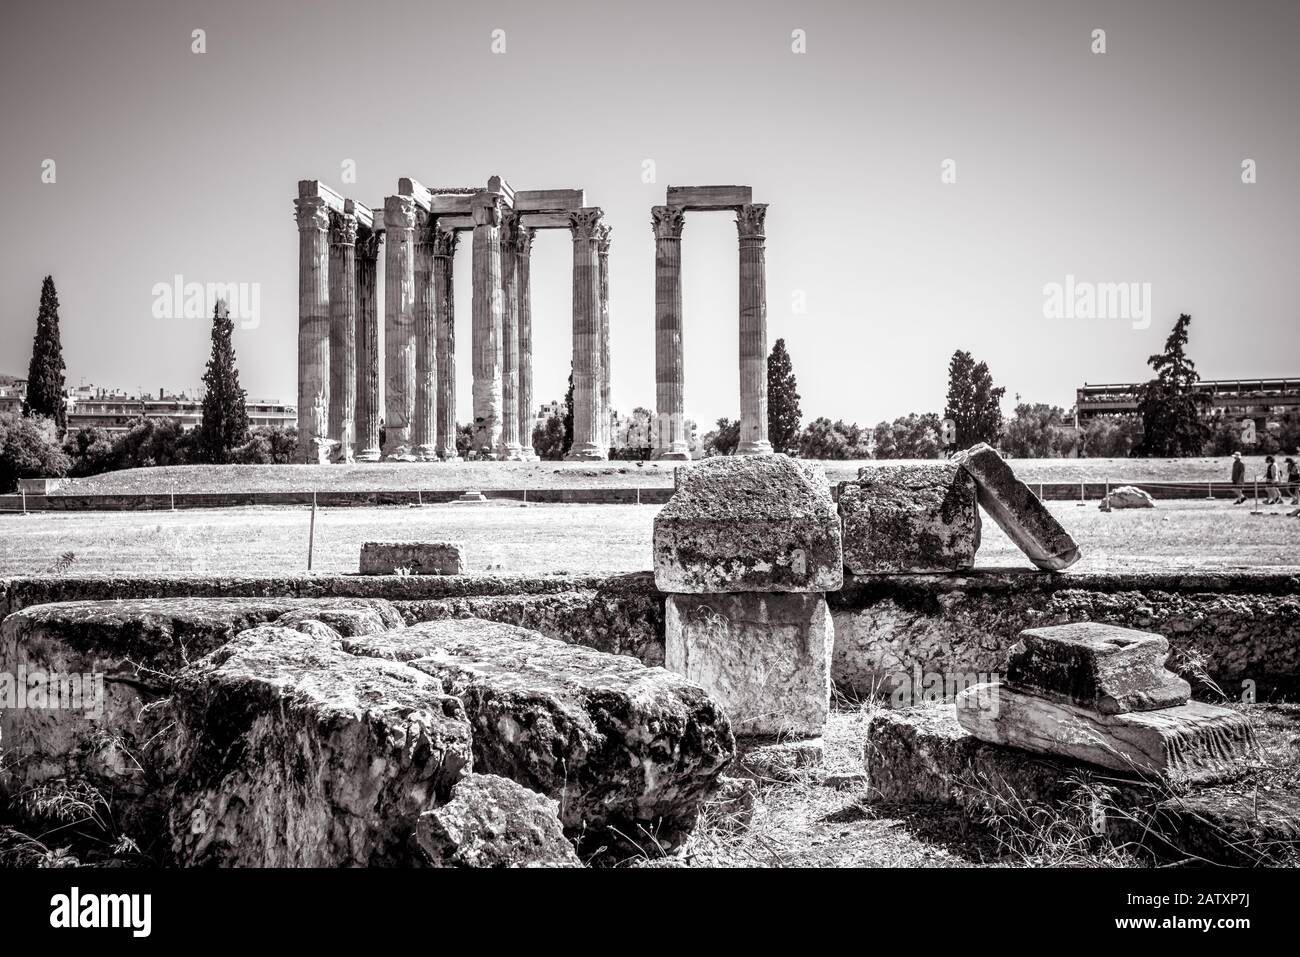 Ancient Greek ruins overlooking the Temple of Olympian Zeus, Athens, Greece. Famous Temple of Zeus or Olympieion is one of the main landmarks of Athen Stock Photo